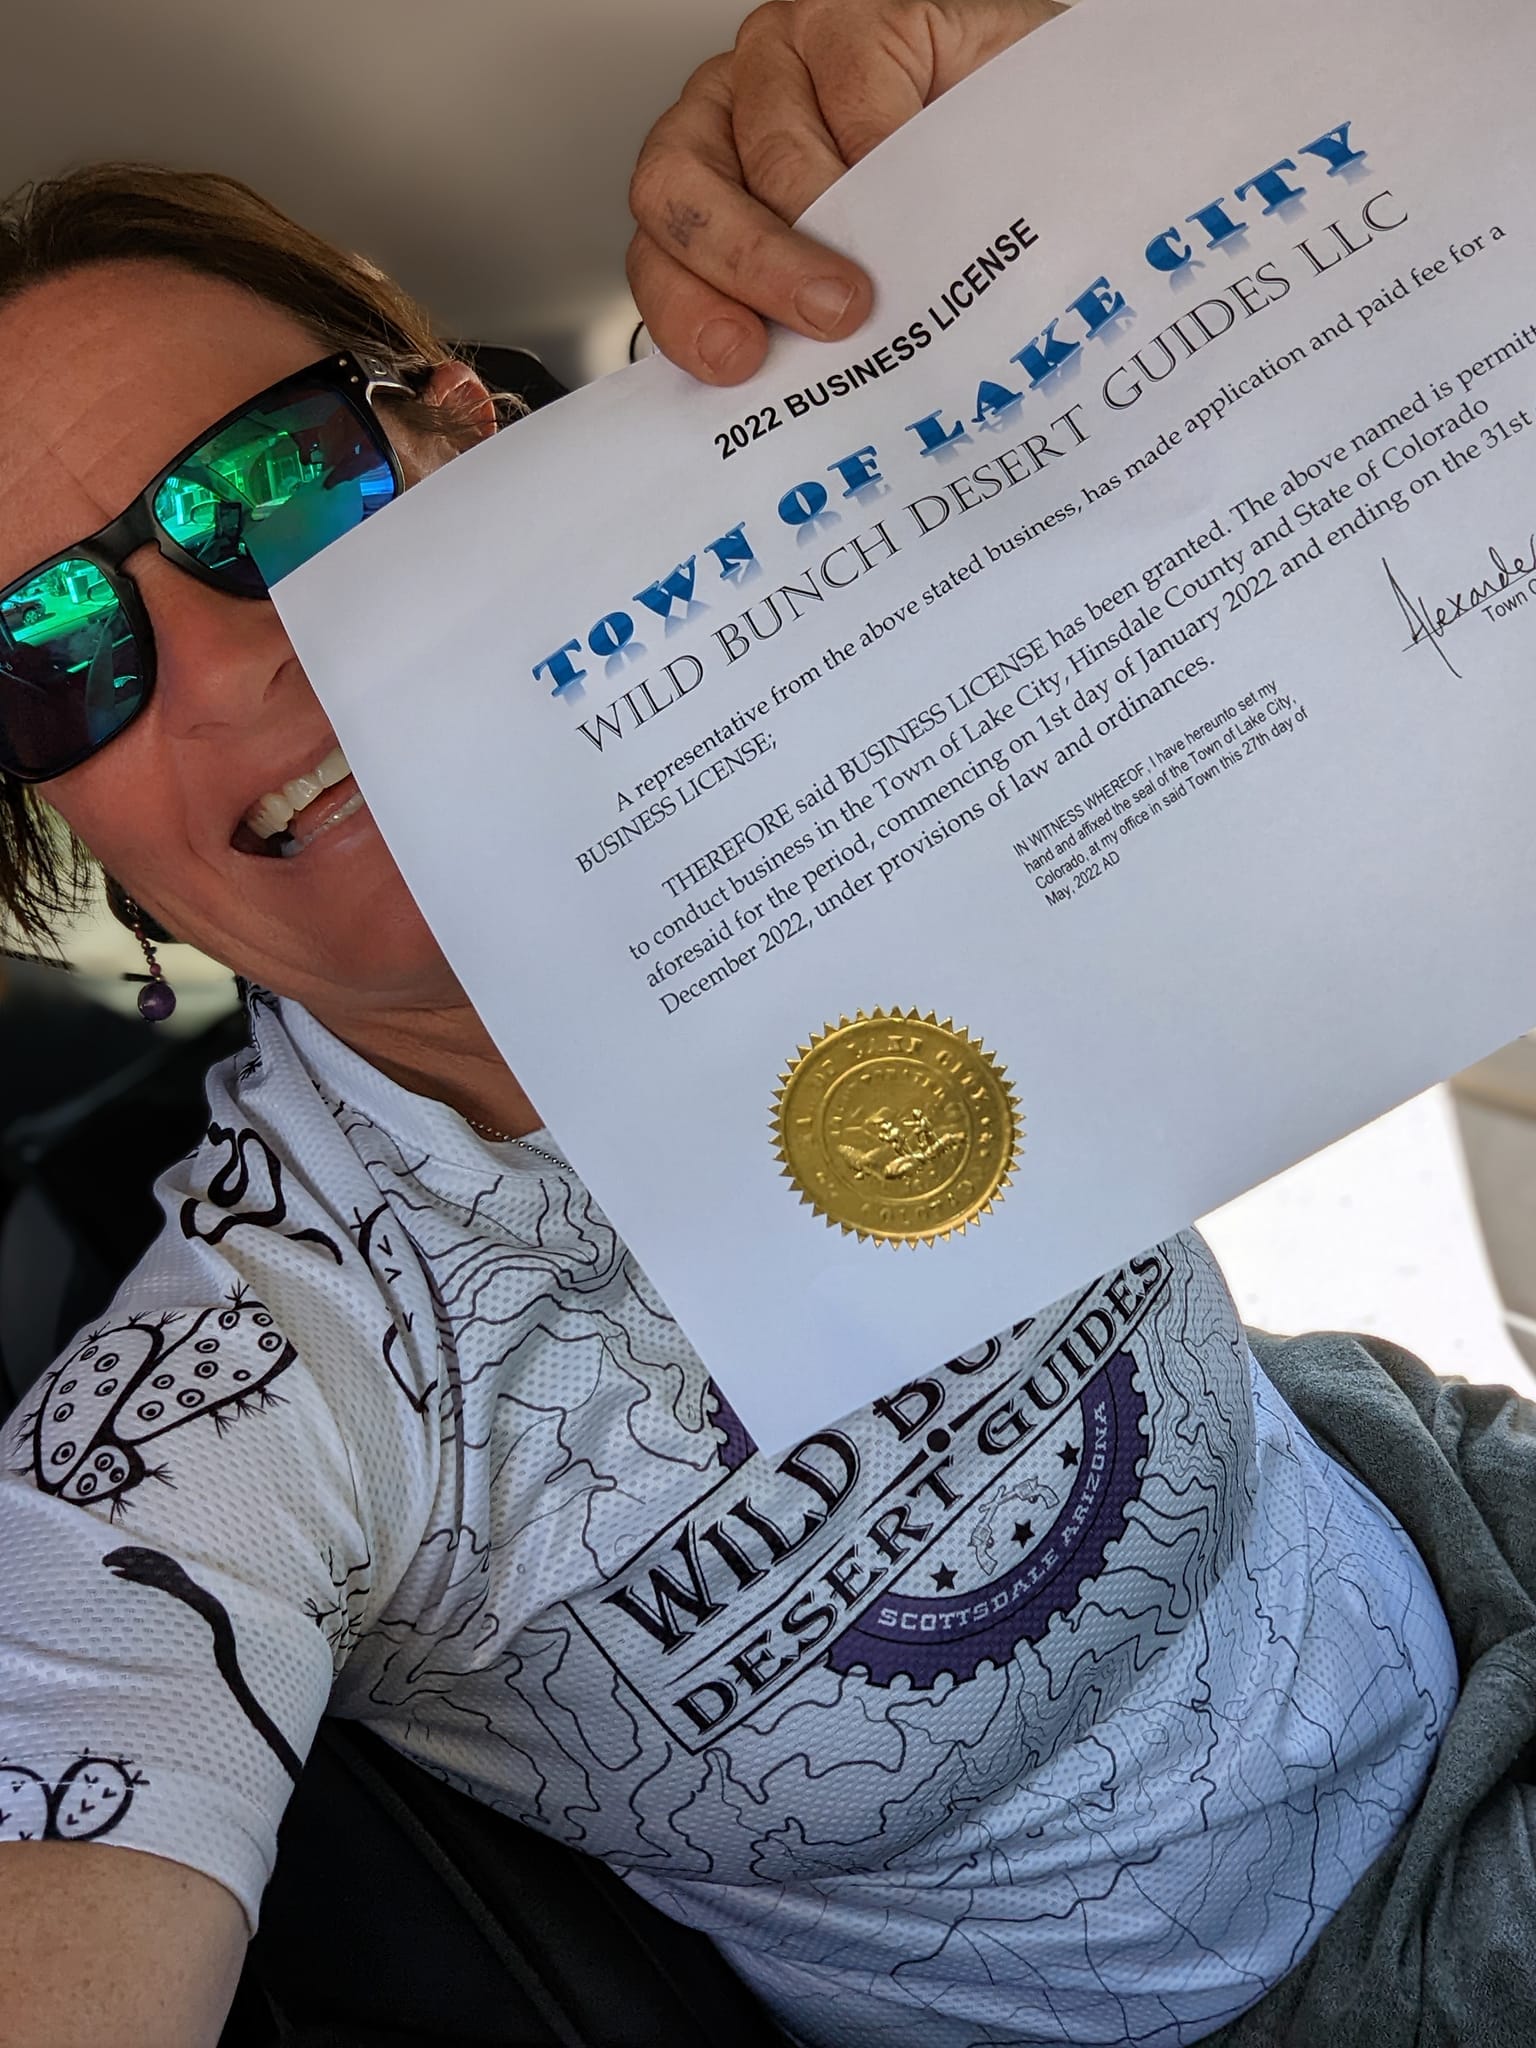 Wild Bunch Desert Guides owner Laurel Darren shows off her new business license from Lake City, Colorado. Wild Bunch is expanding from its Phoenix adventure tours roots to offering Colorado hiking tours this summer in the remote tourist destination of the Lake City region in the San Juan Mountains.. 